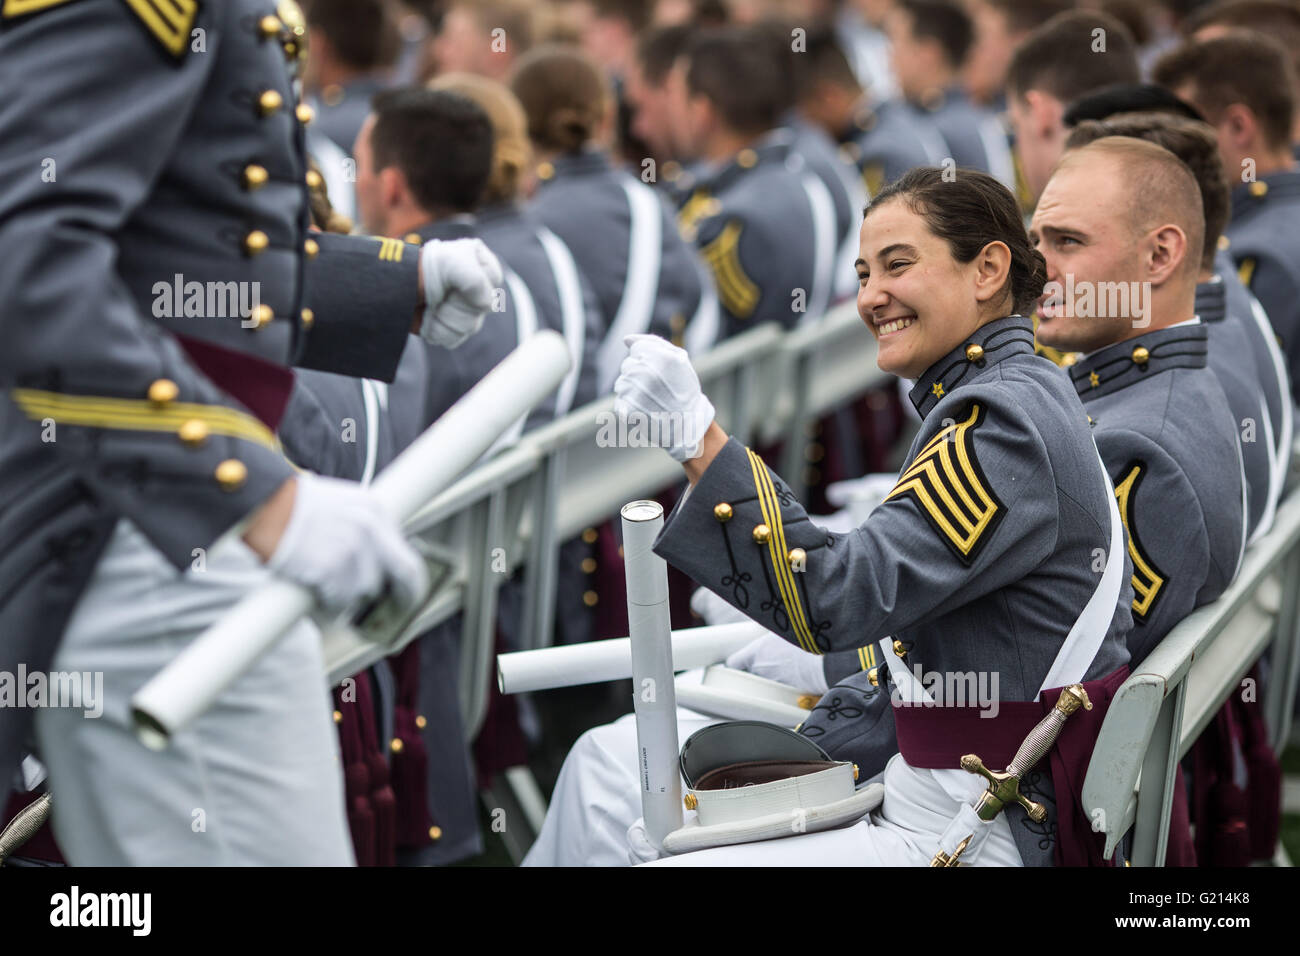 West Point, USA. 21st May, 2016. Graduating cadets congratulate each other during the commencement ceremony at the United States Military Academy at West Point, New York, the United States, May 21, 2016. Some 953 cadets received their degrees and commissions as second lieutenants on Saturday. Credit:  Li Muzi/Xinhua/Alamy Live News Stock Photo